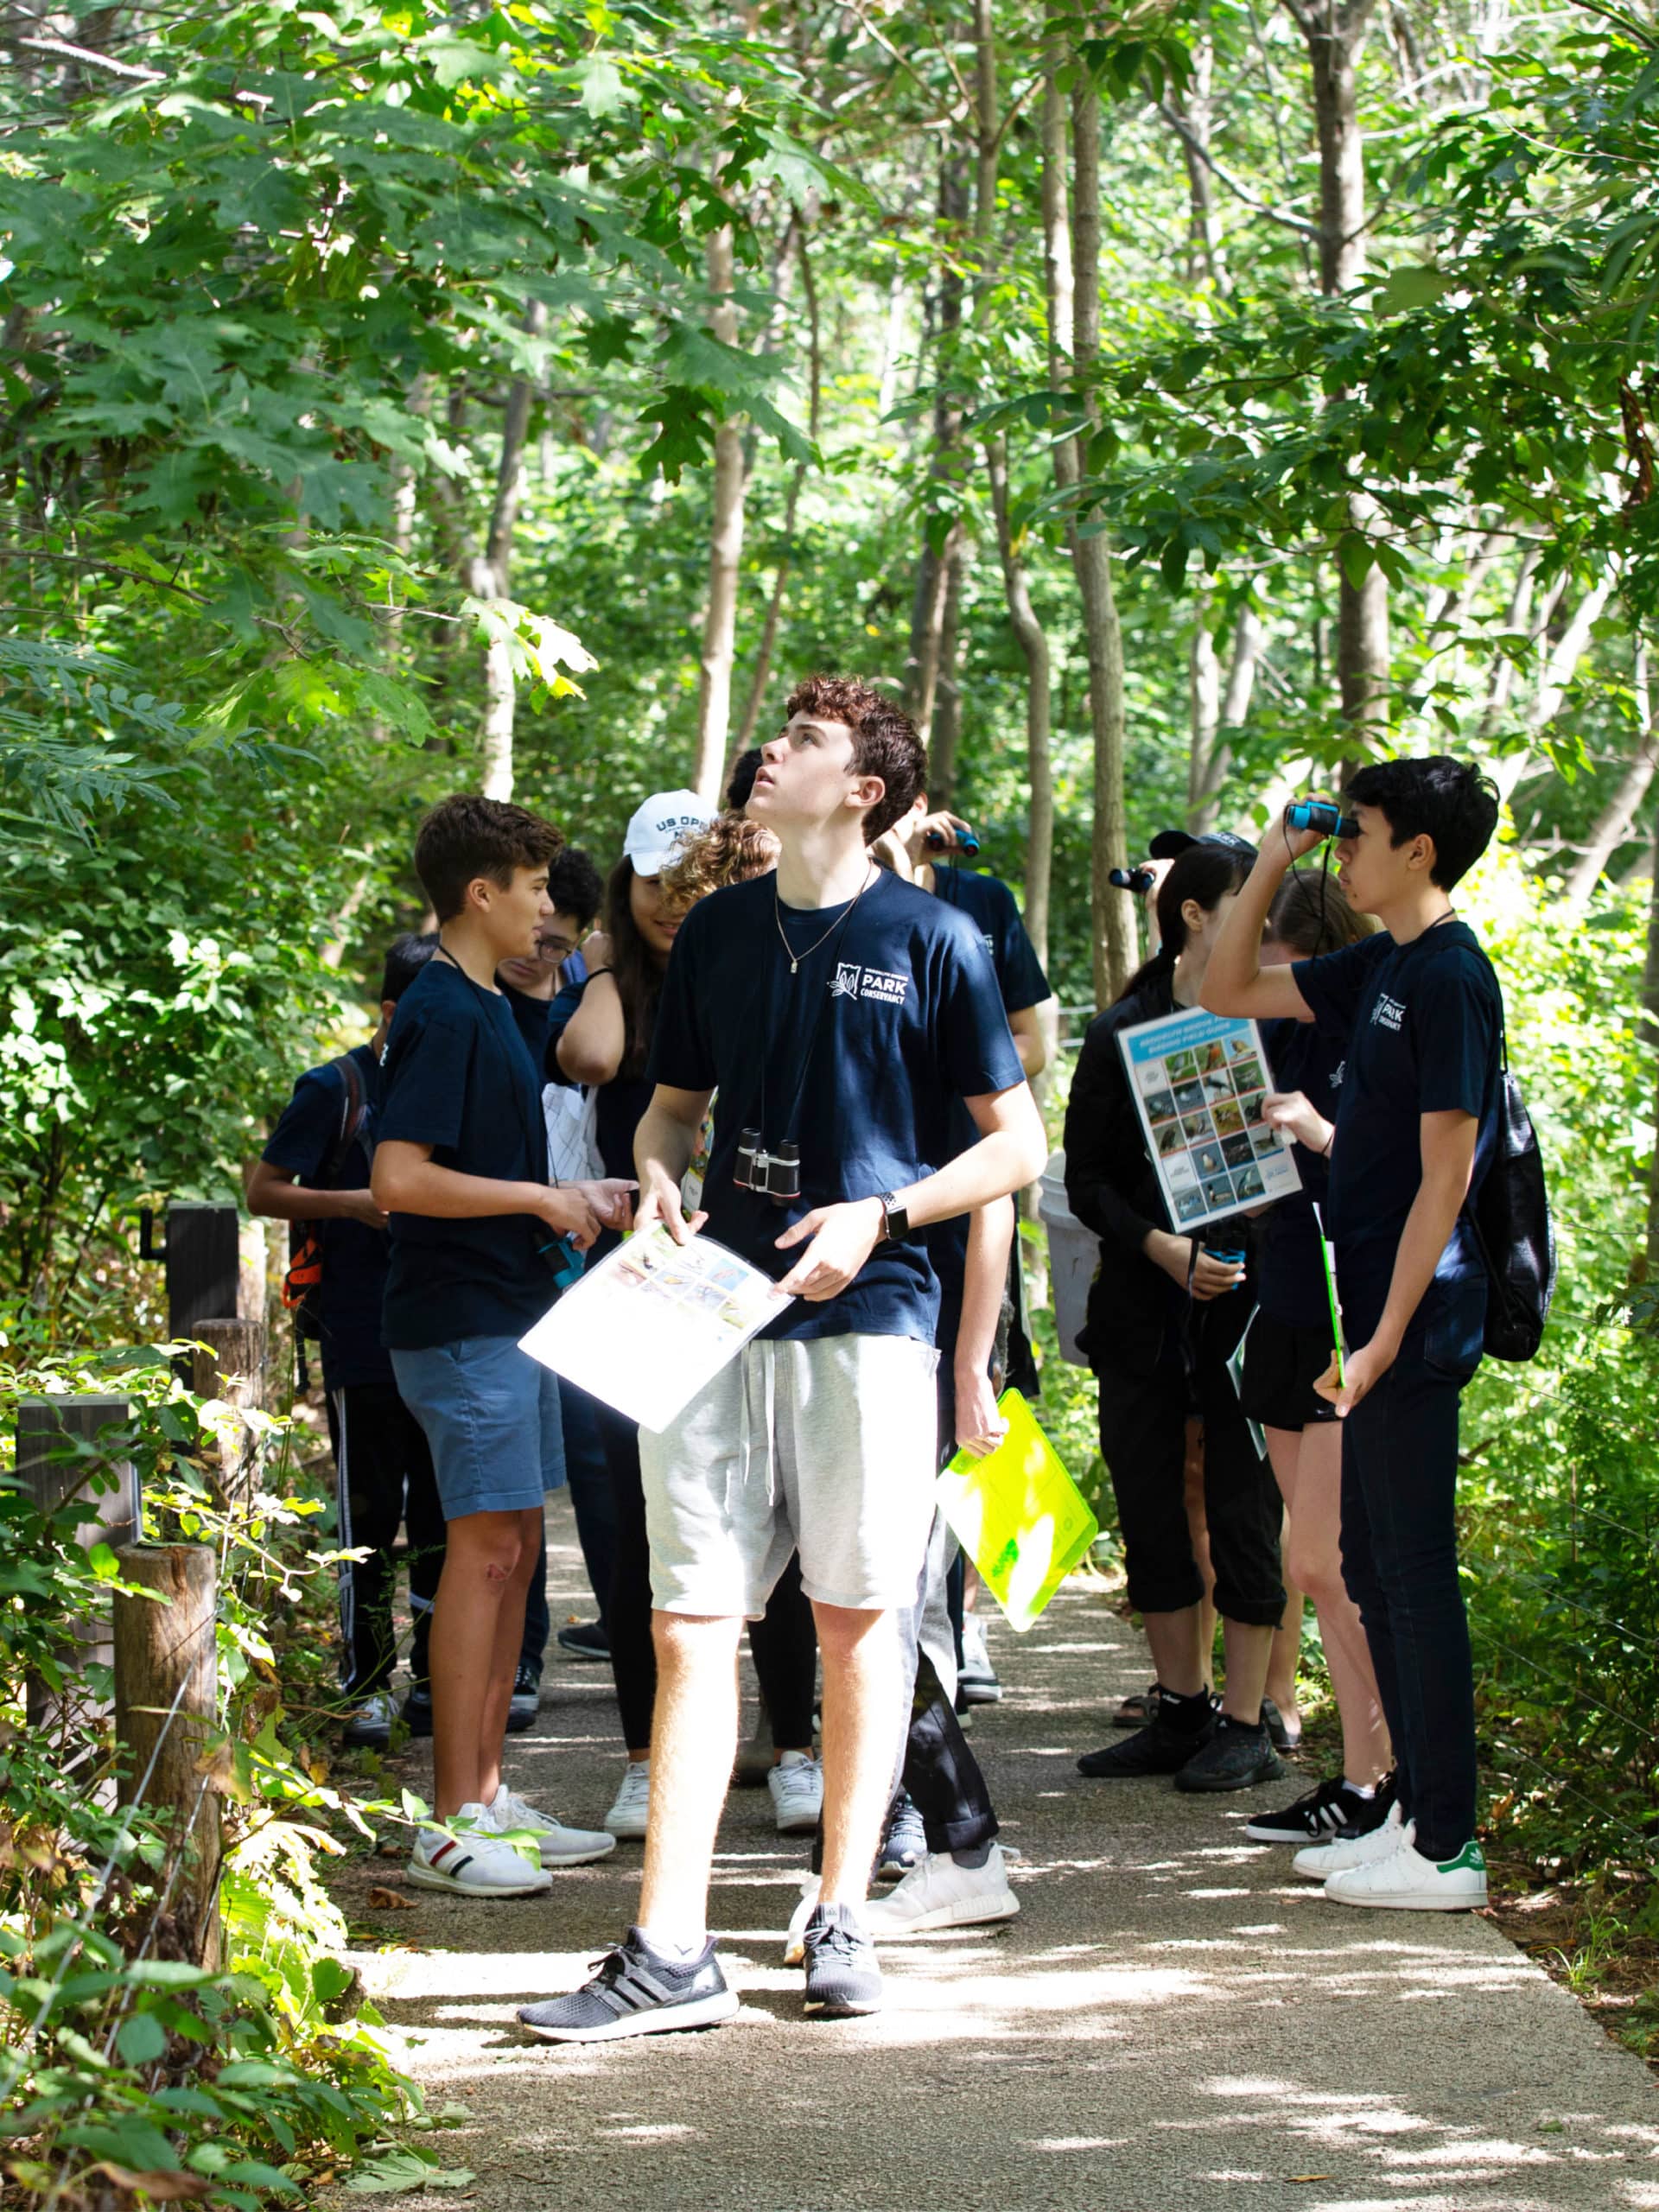 Teenagers birdwatching on a tree-lined path.